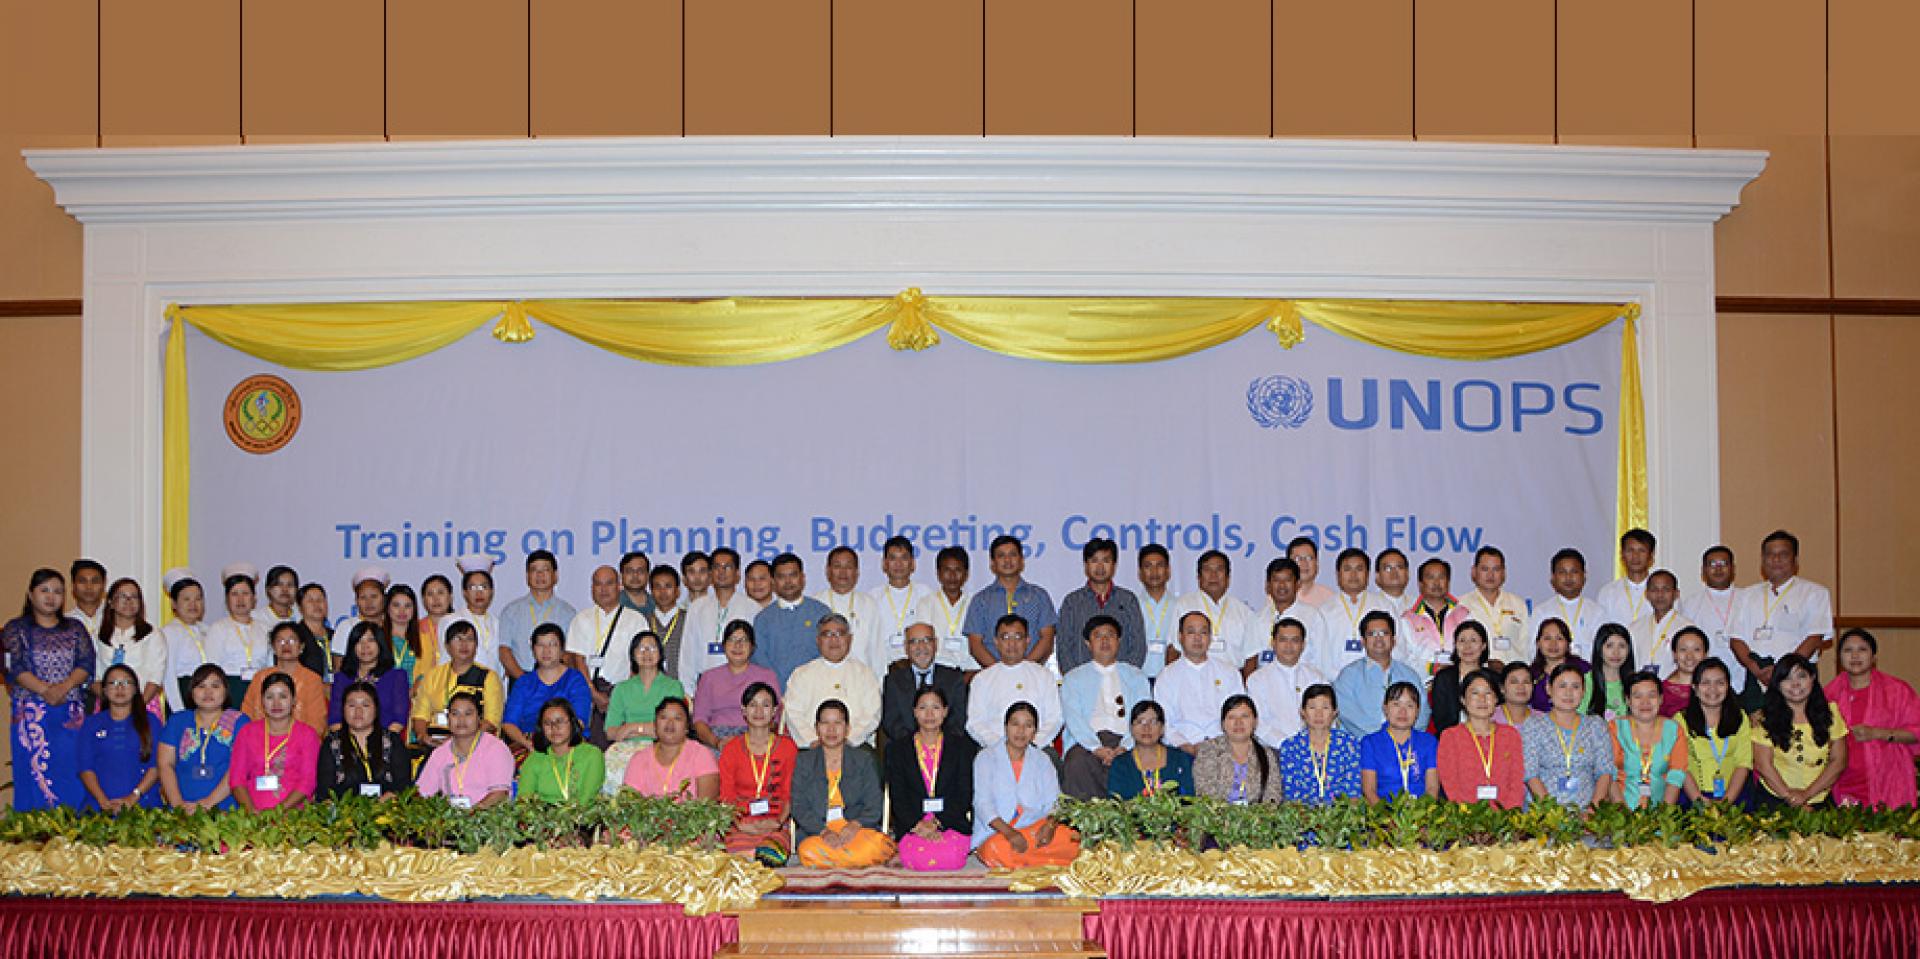 Dr Thar Tun Kyaw, Director General, DOPH, MOHS, with officials from the Ministry of Health and Sports, UNOPS and participating government health staff from across the country, after the opening session of the first batch of training, Nay Pyi Taw, 23 October 2017.